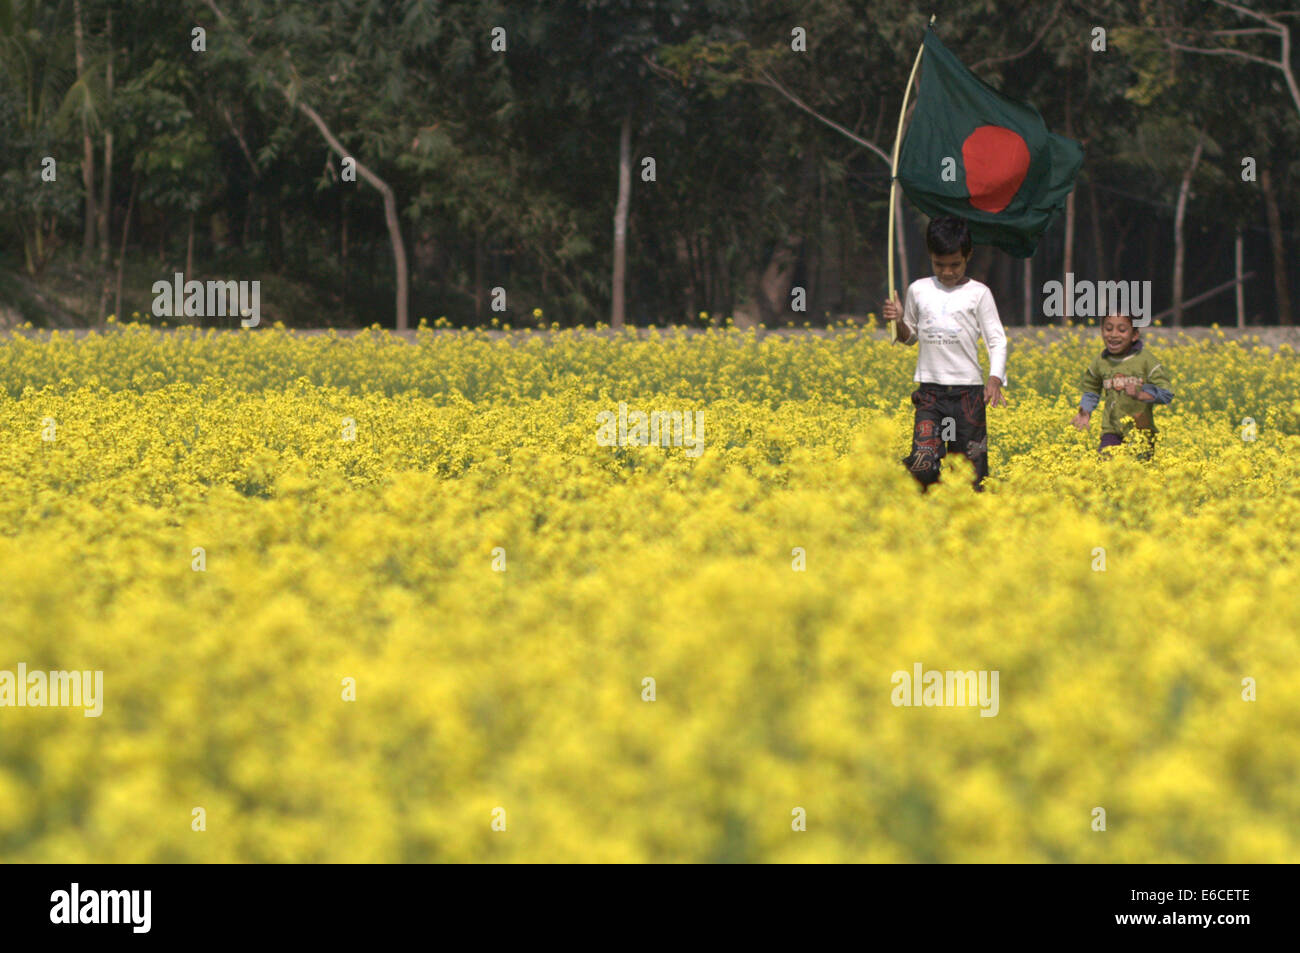 Bangladesh. 20th Aug, 2014. mustard field in Bangladesh.Mustard is a cool weather crop and is grown from seeds sown in early spring. From mid December through to the end of January, Bangladesh farmers cultivate their crops of brightly coloured yellow mustard flowers that are in full bloom. © Zakir Hossain Chowdhury/ZUMA Wire/Alamy Live News Stock Photo